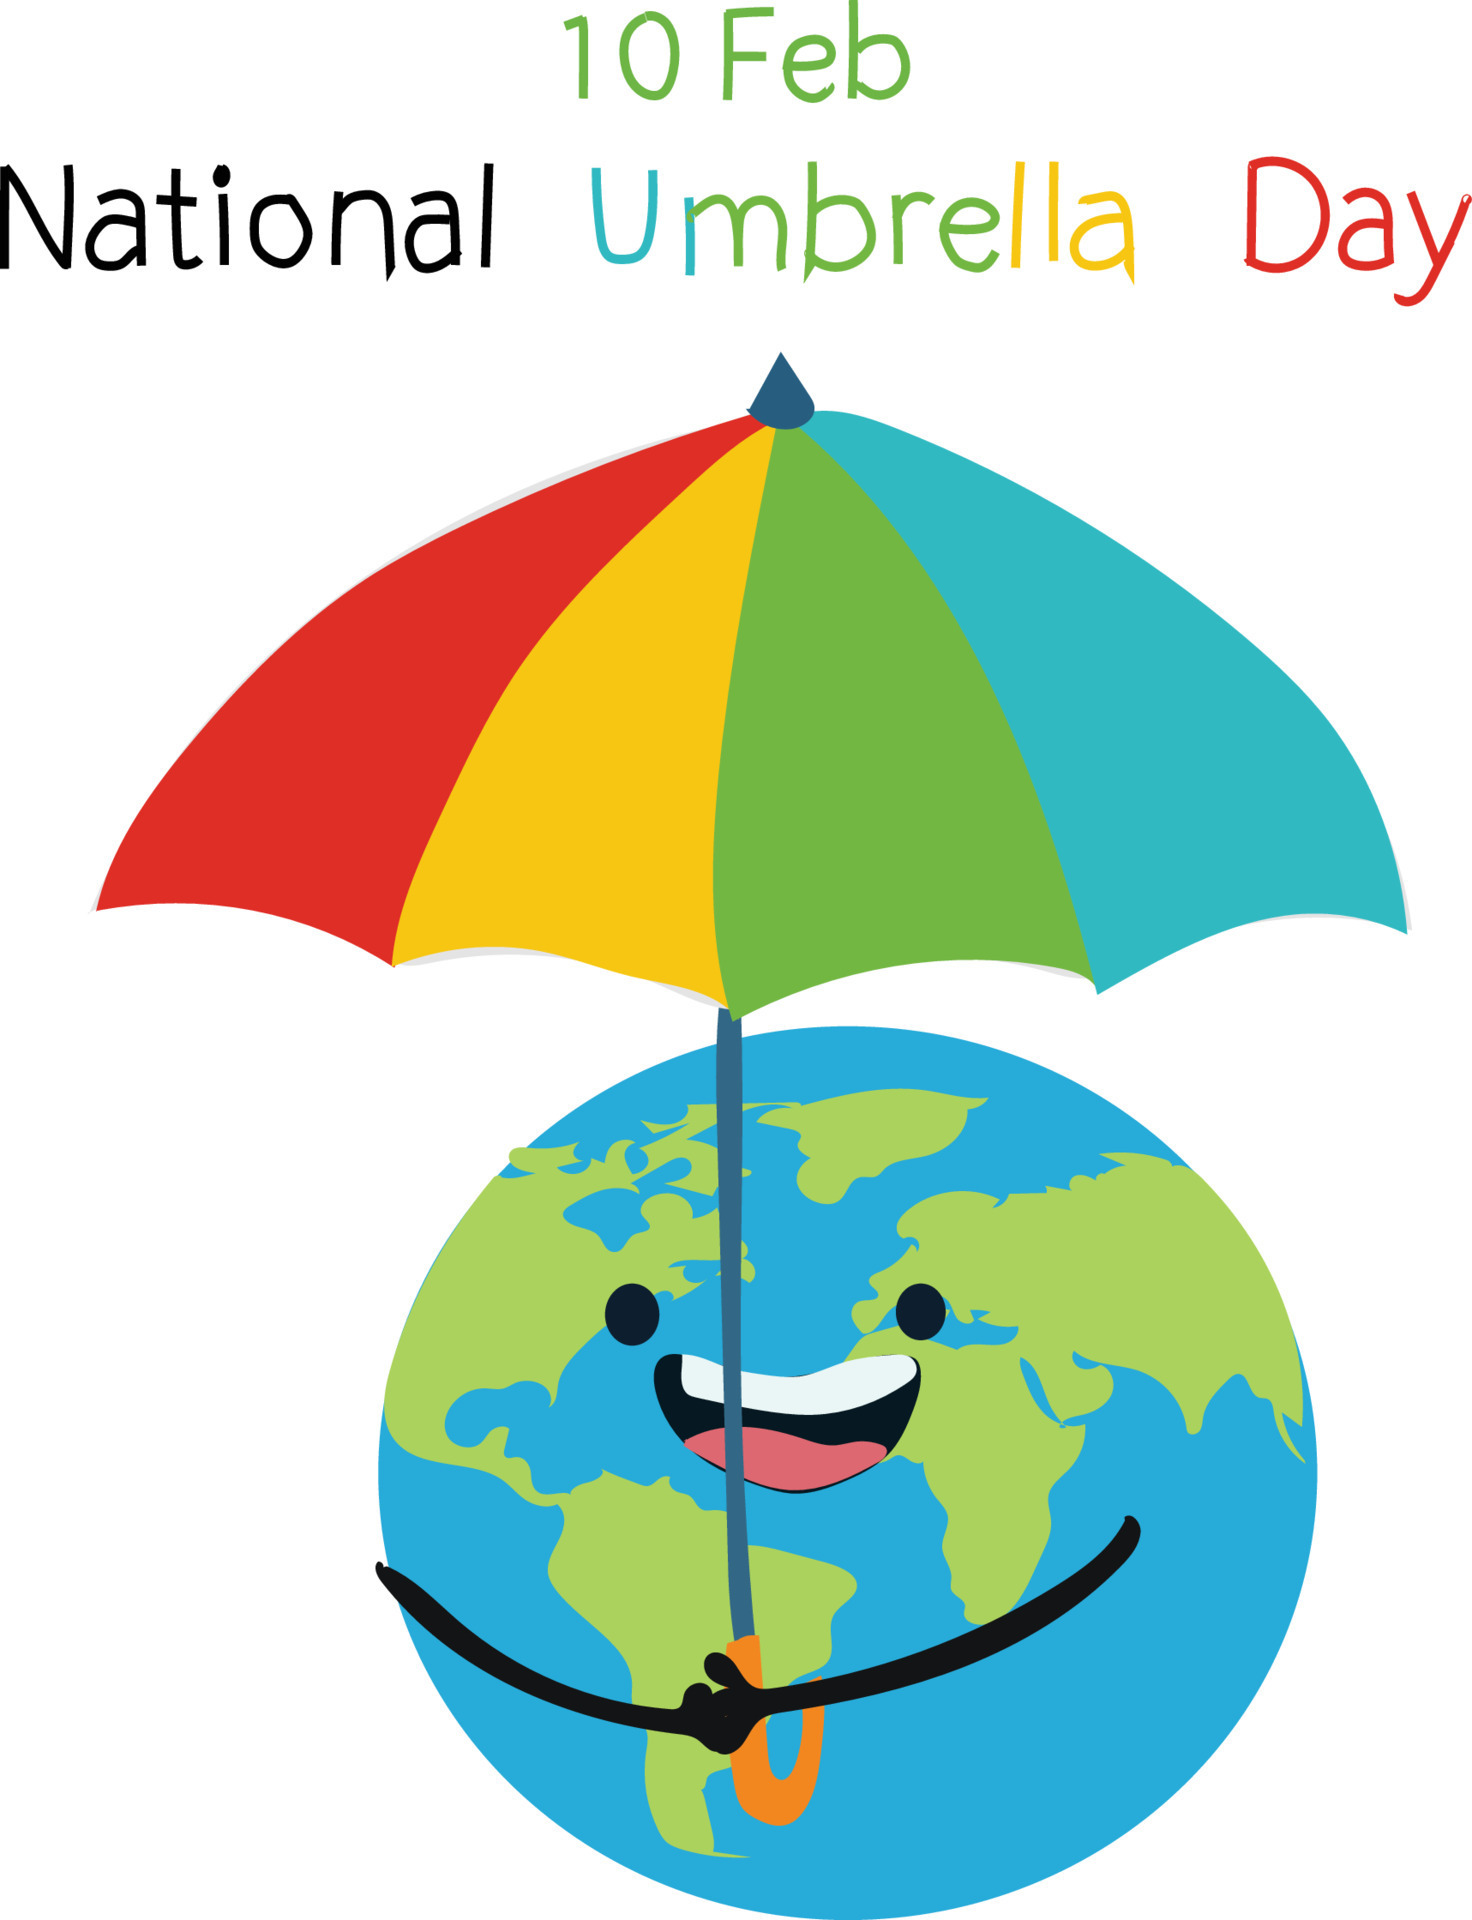 national umbrella day is celebrated every year on 10 February. 19018546